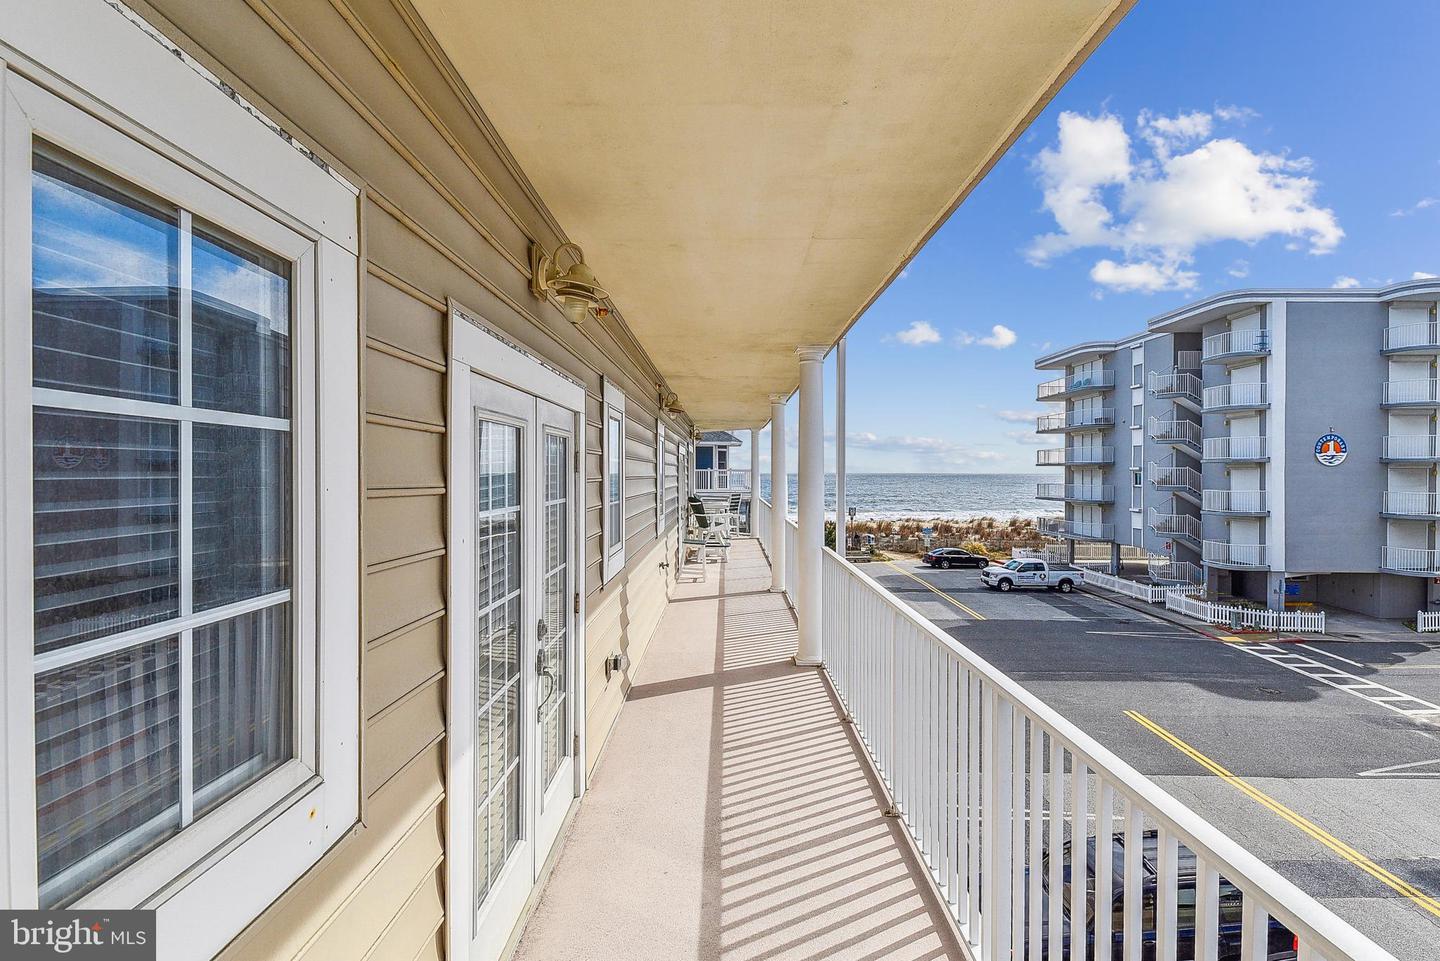 MDWO2019340-802918959838-2024-03-12-11-41-10 14301 Wight St #201 | Ocean City, MD Real Estate For Sale | MLS# Mdwo2019340  - 1st Choice Properties